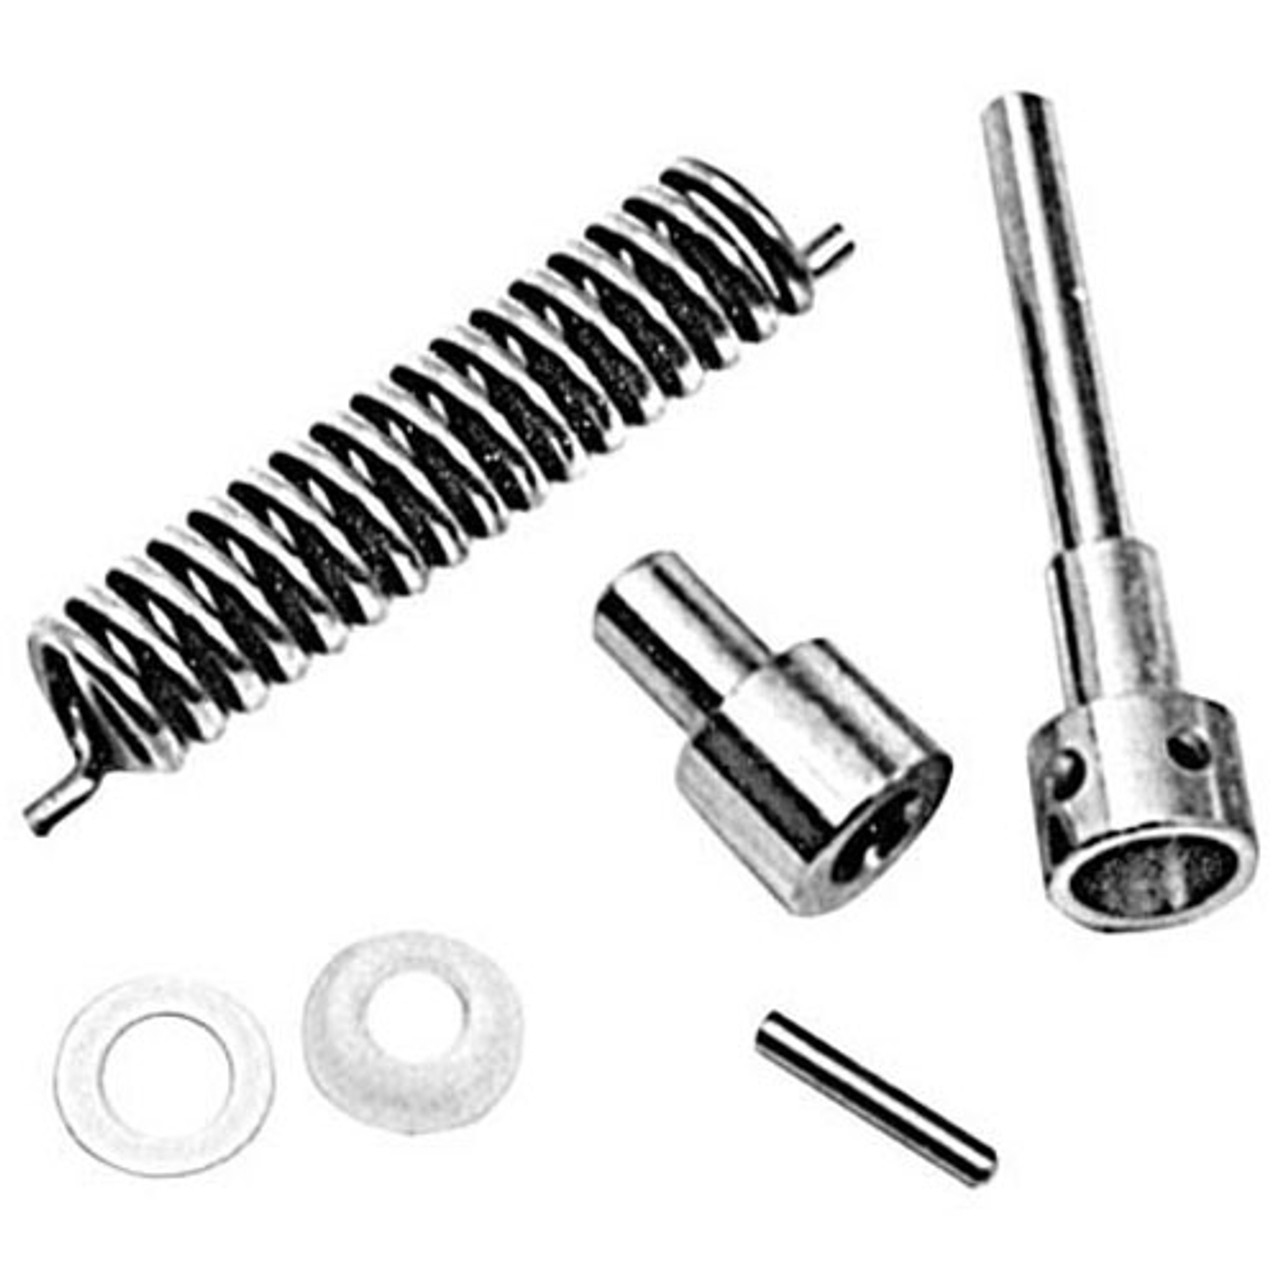 Spring Kit - Replacement Part For True 851504